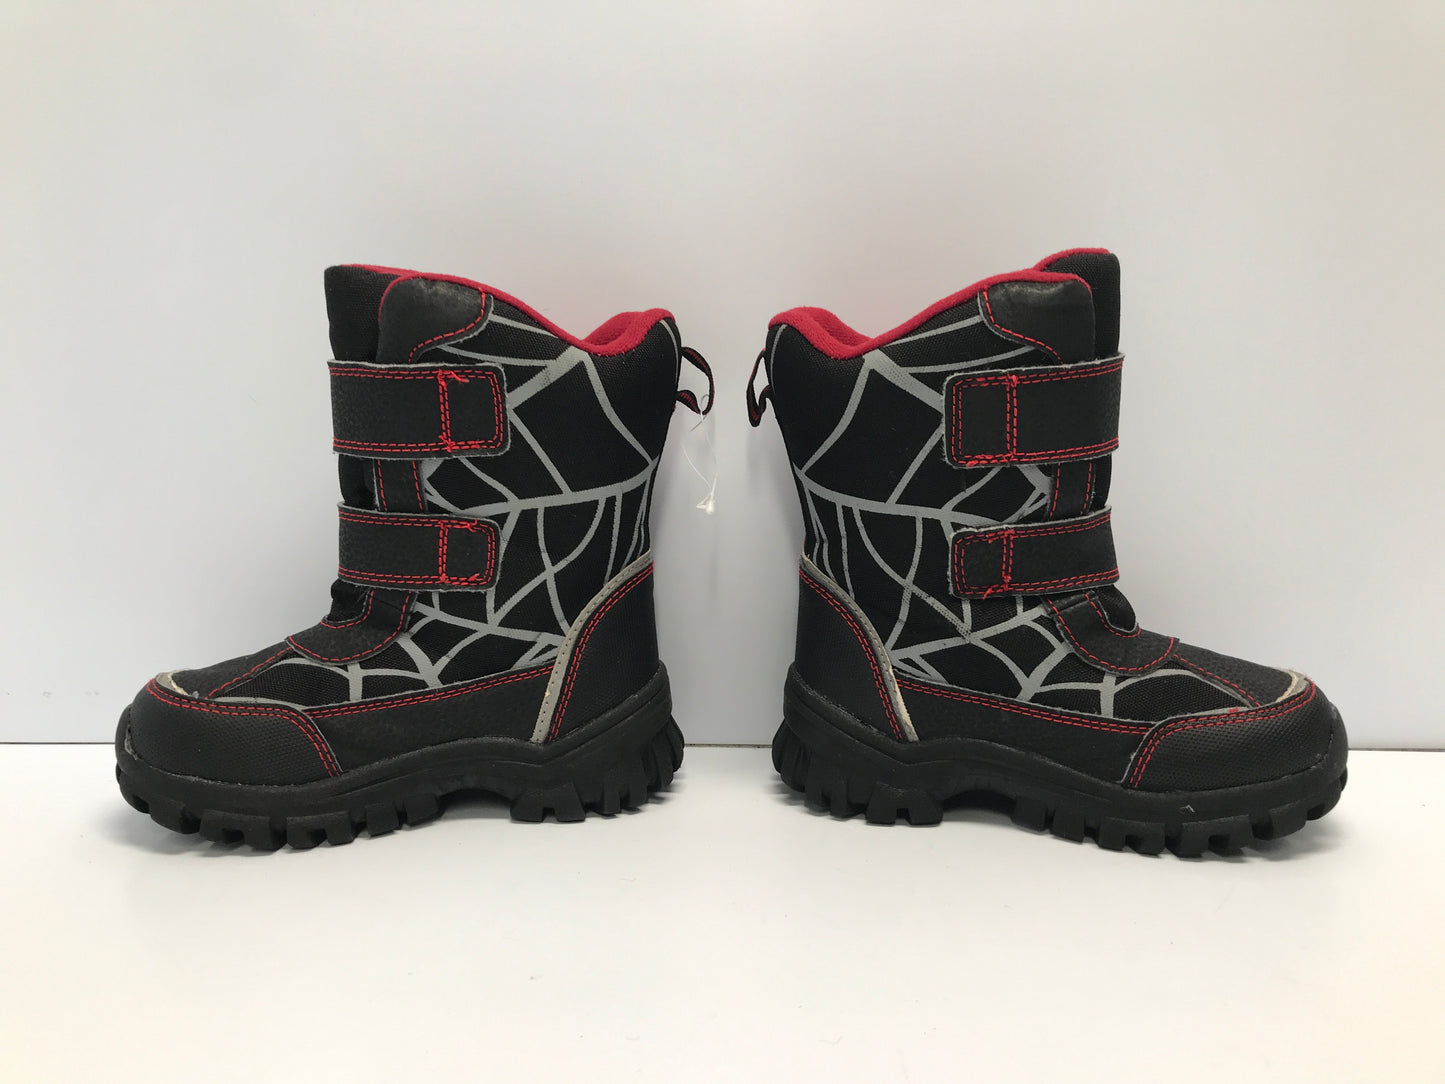 Winter Snow Boots Child Toddler Size 10 Spider Black Red  Rubber Soles Like New